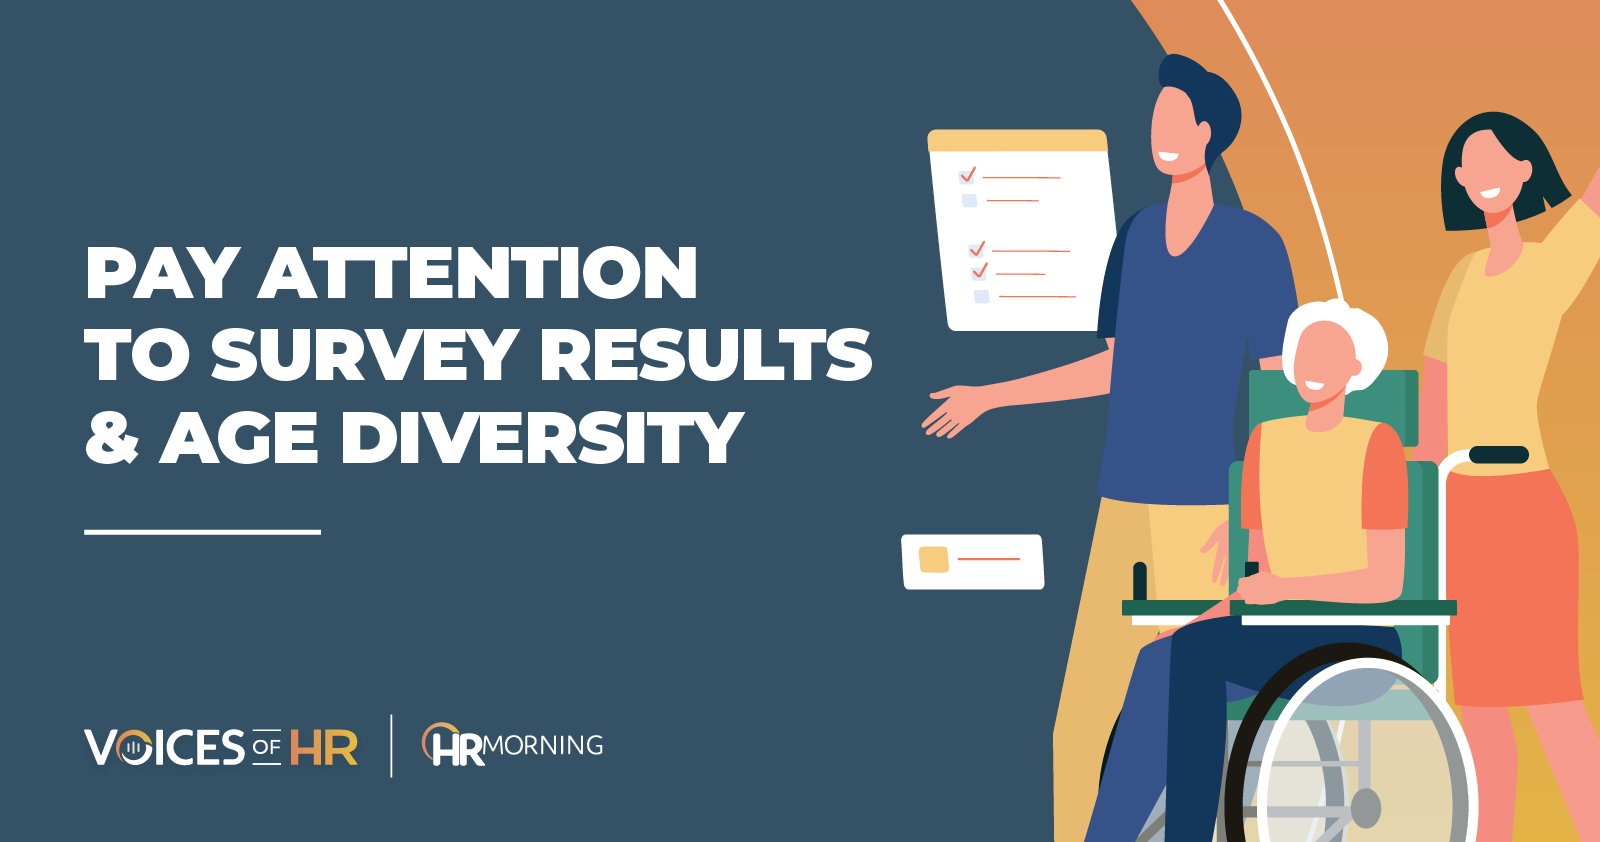 Pay attention to survey results & age diversity